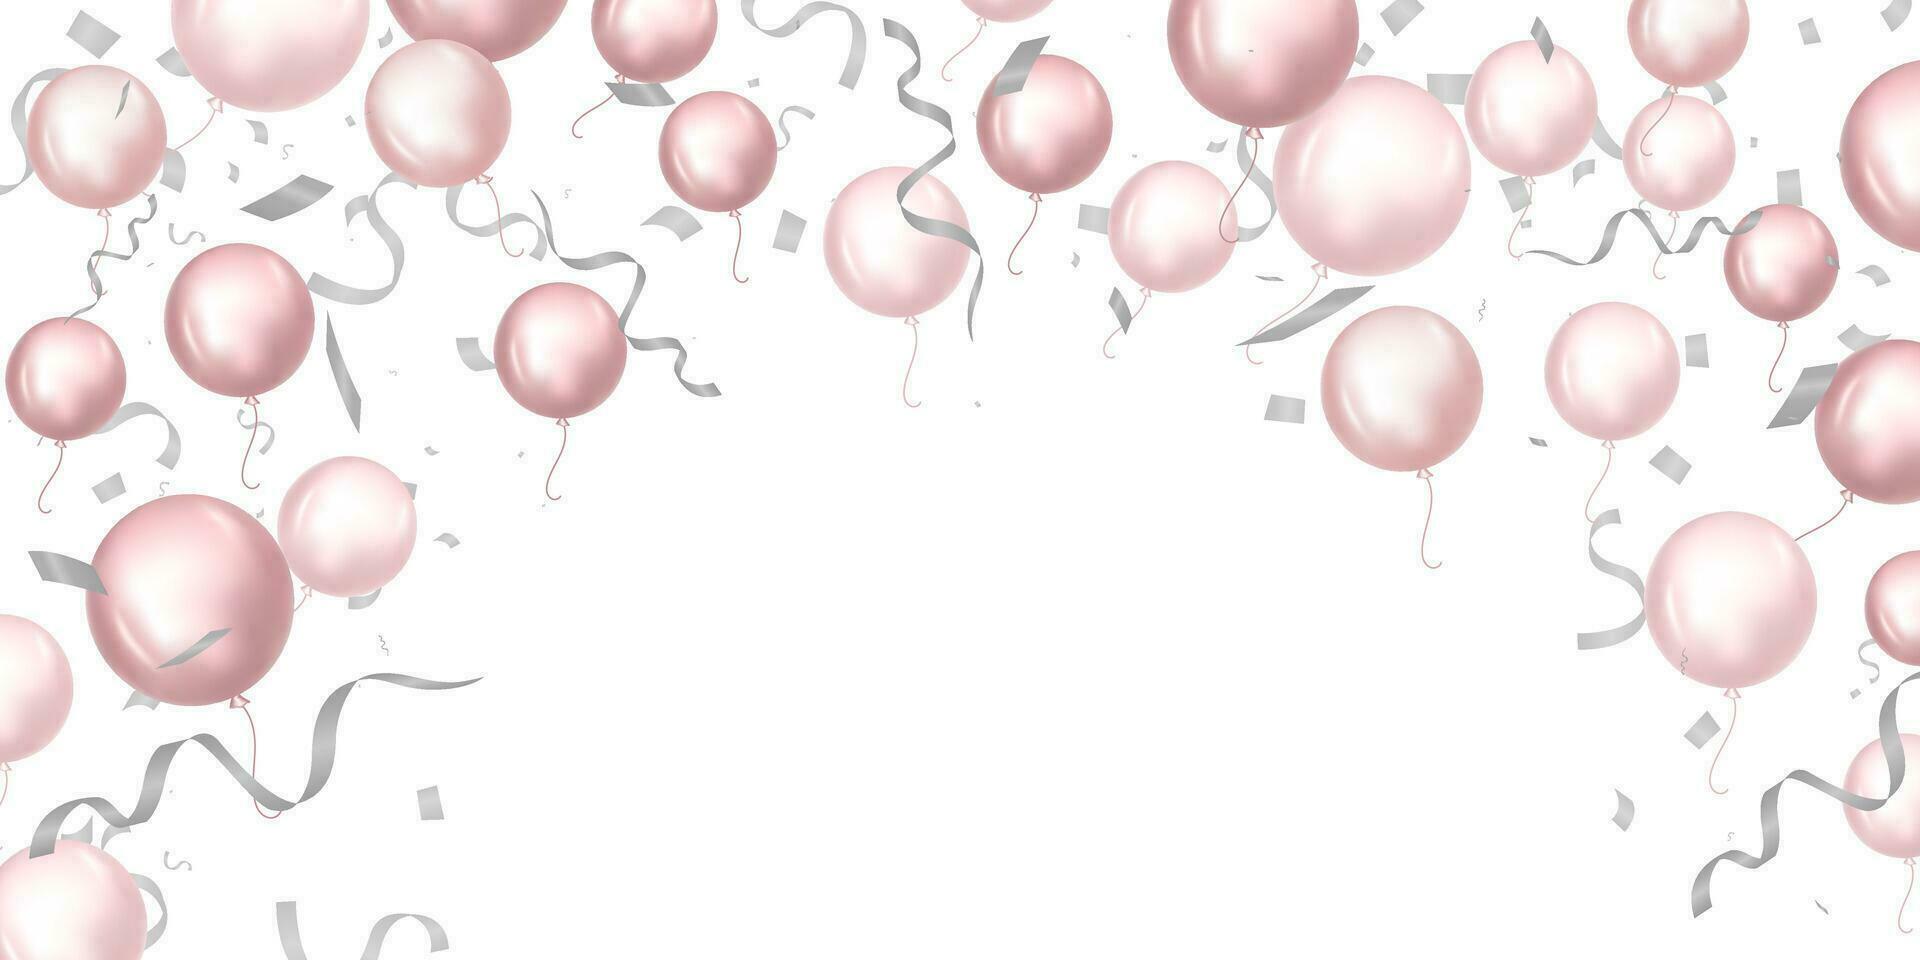 pink balloons and confetti background. vector illustration